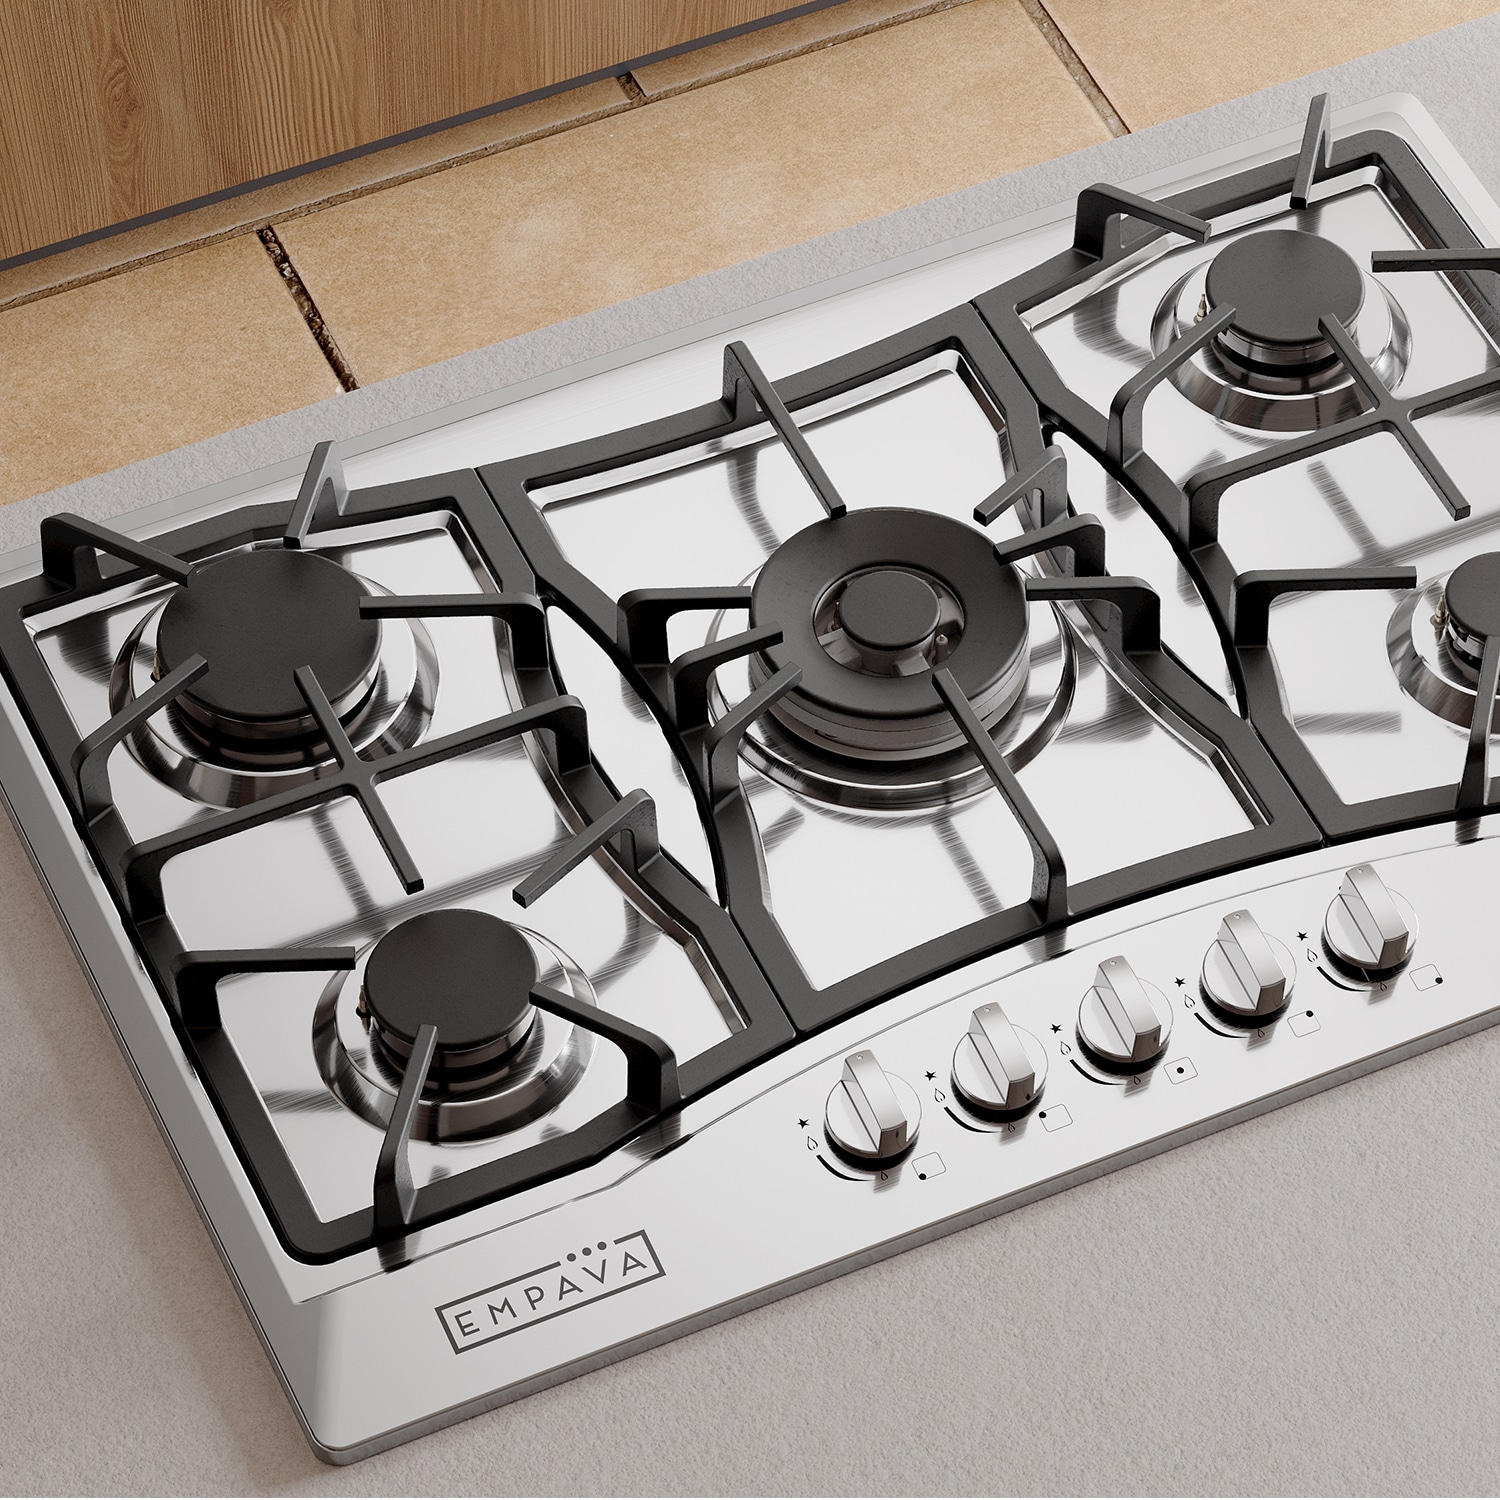 Summit Appliance 30-in 4 Burners Coil Stainless Steel Electric Cooktop